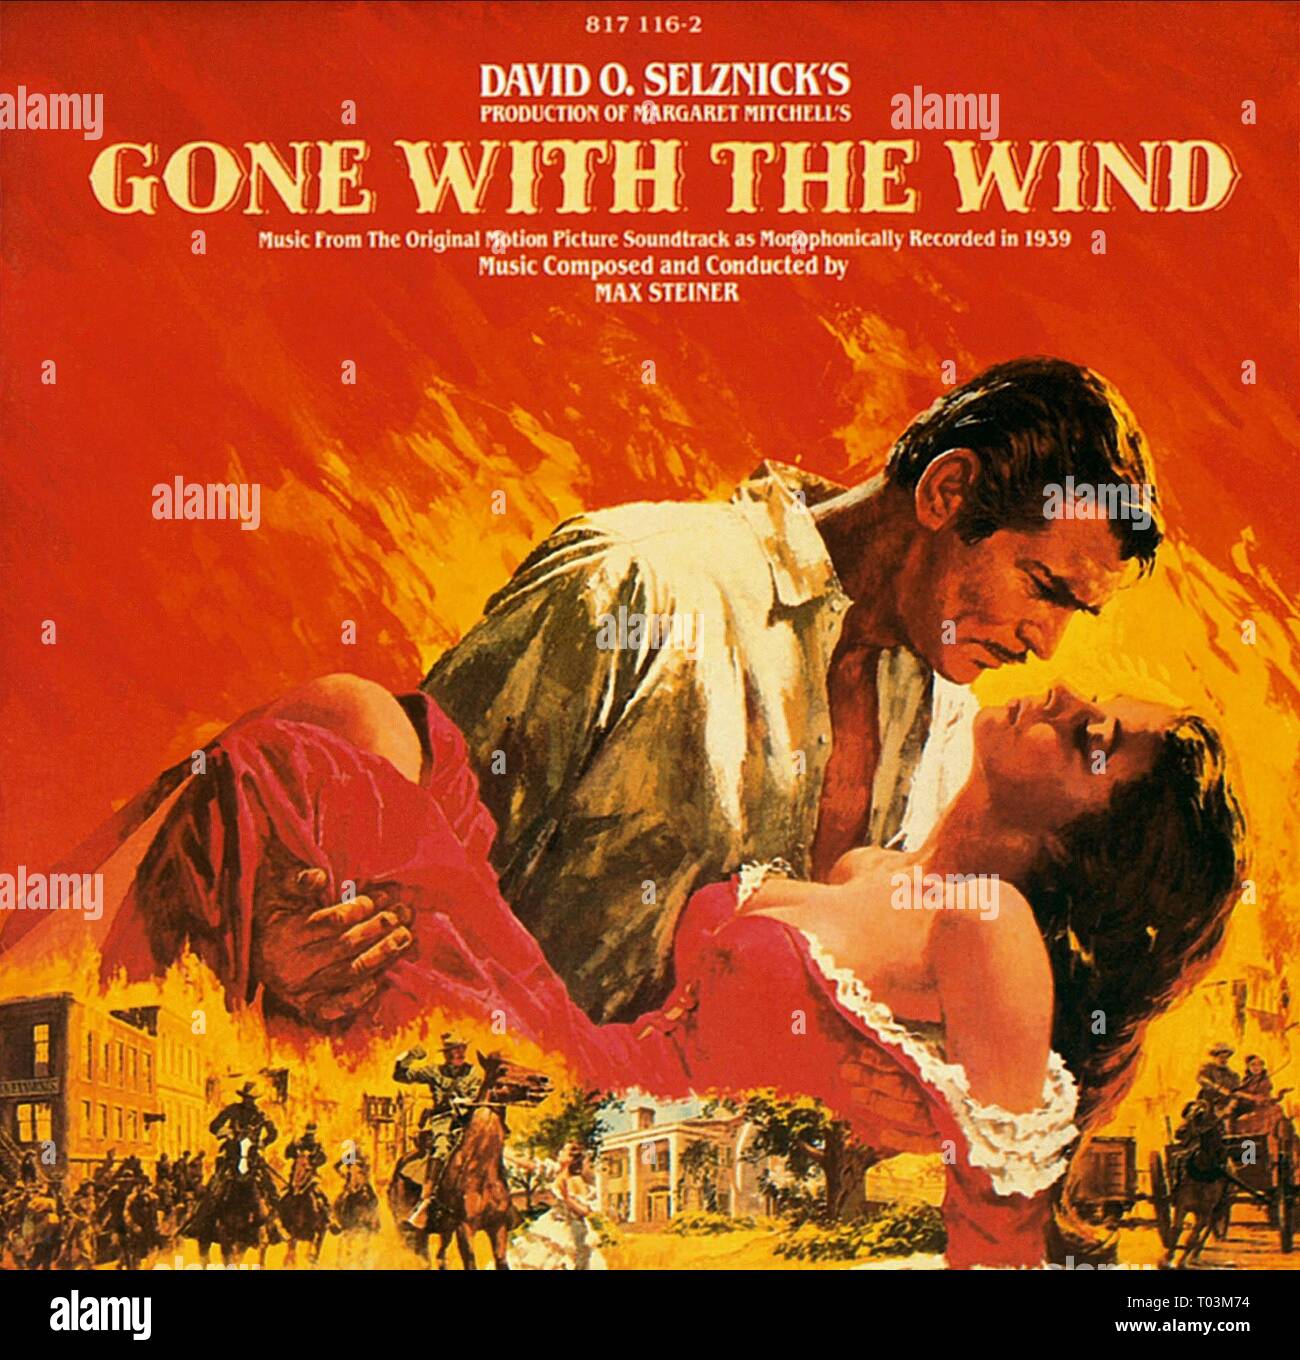 analyse tømrer Banke FILM POSTER, GONE WITH THE WIND, 1939 Stock Photo - Alamy